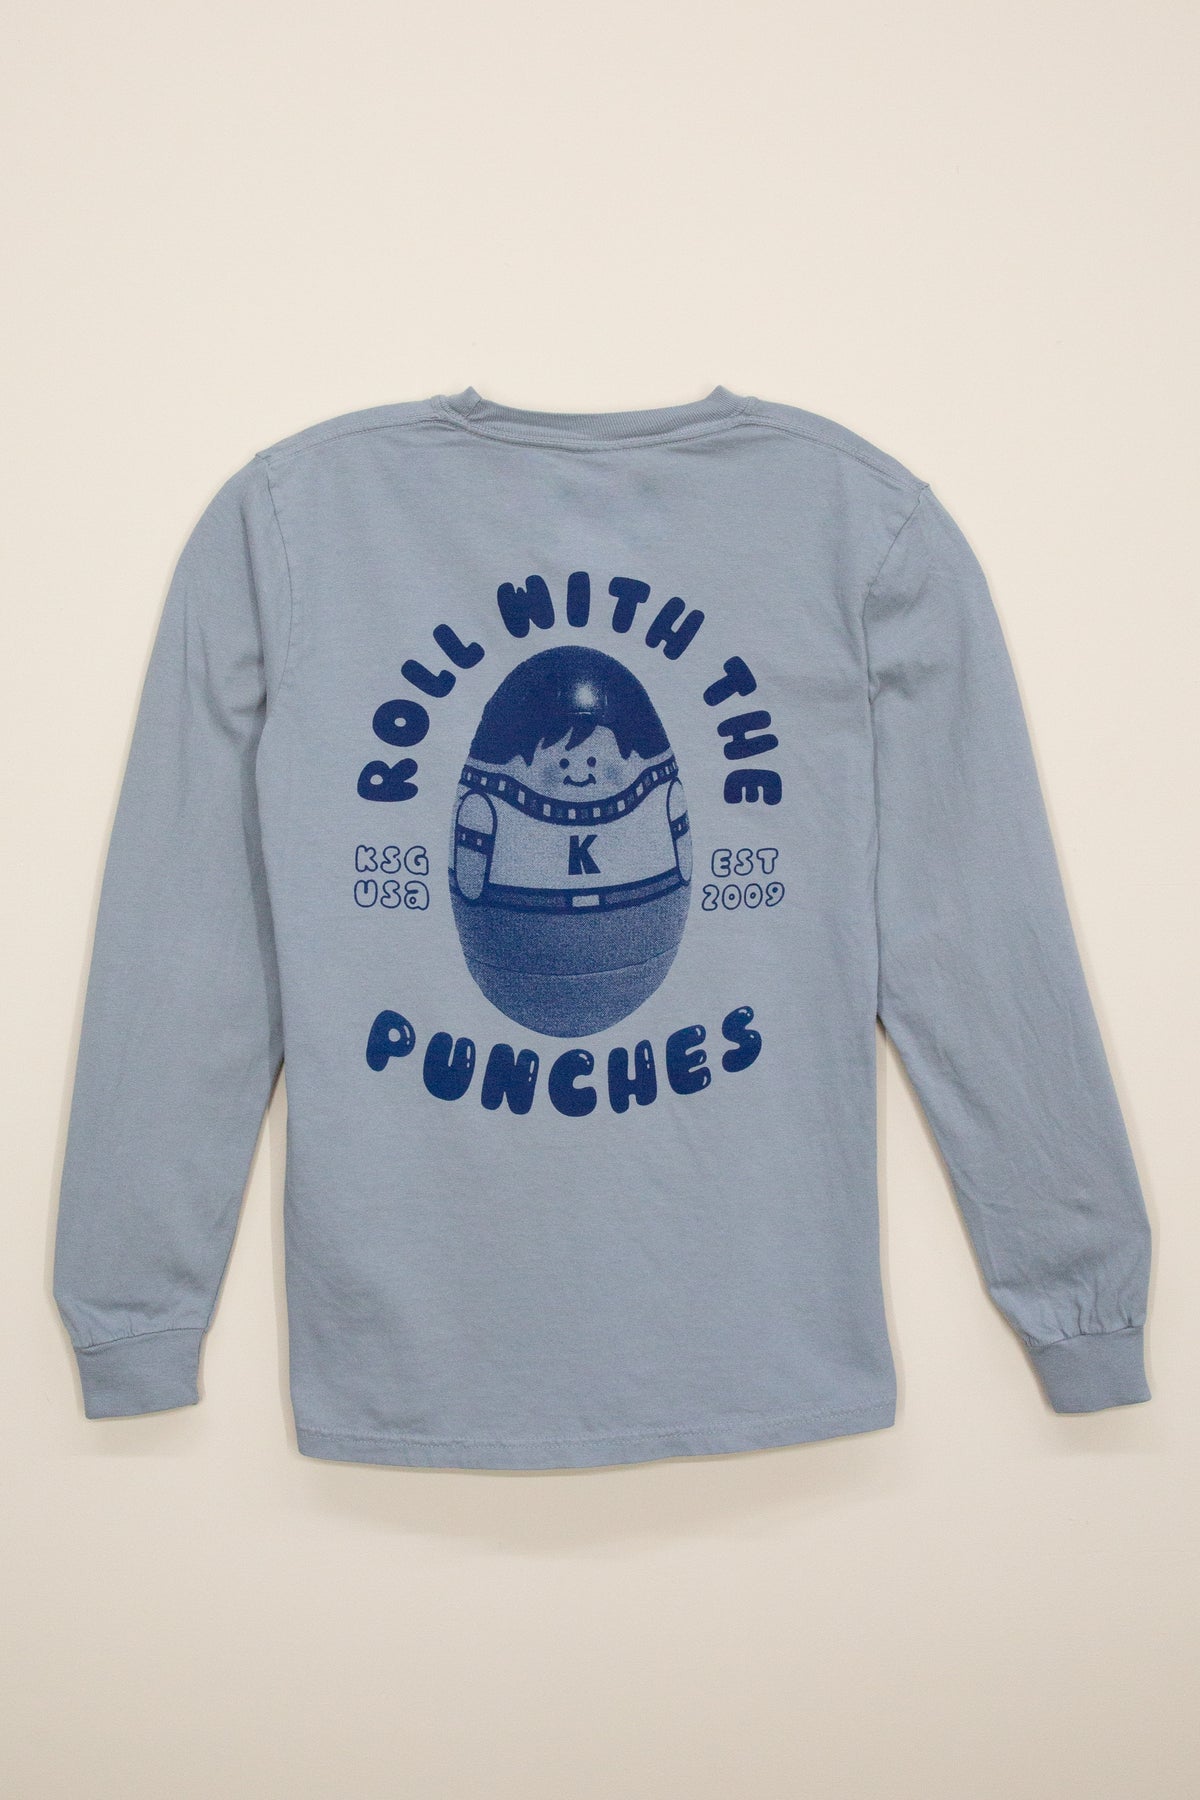 roll with the punches long sleeve pocket tee